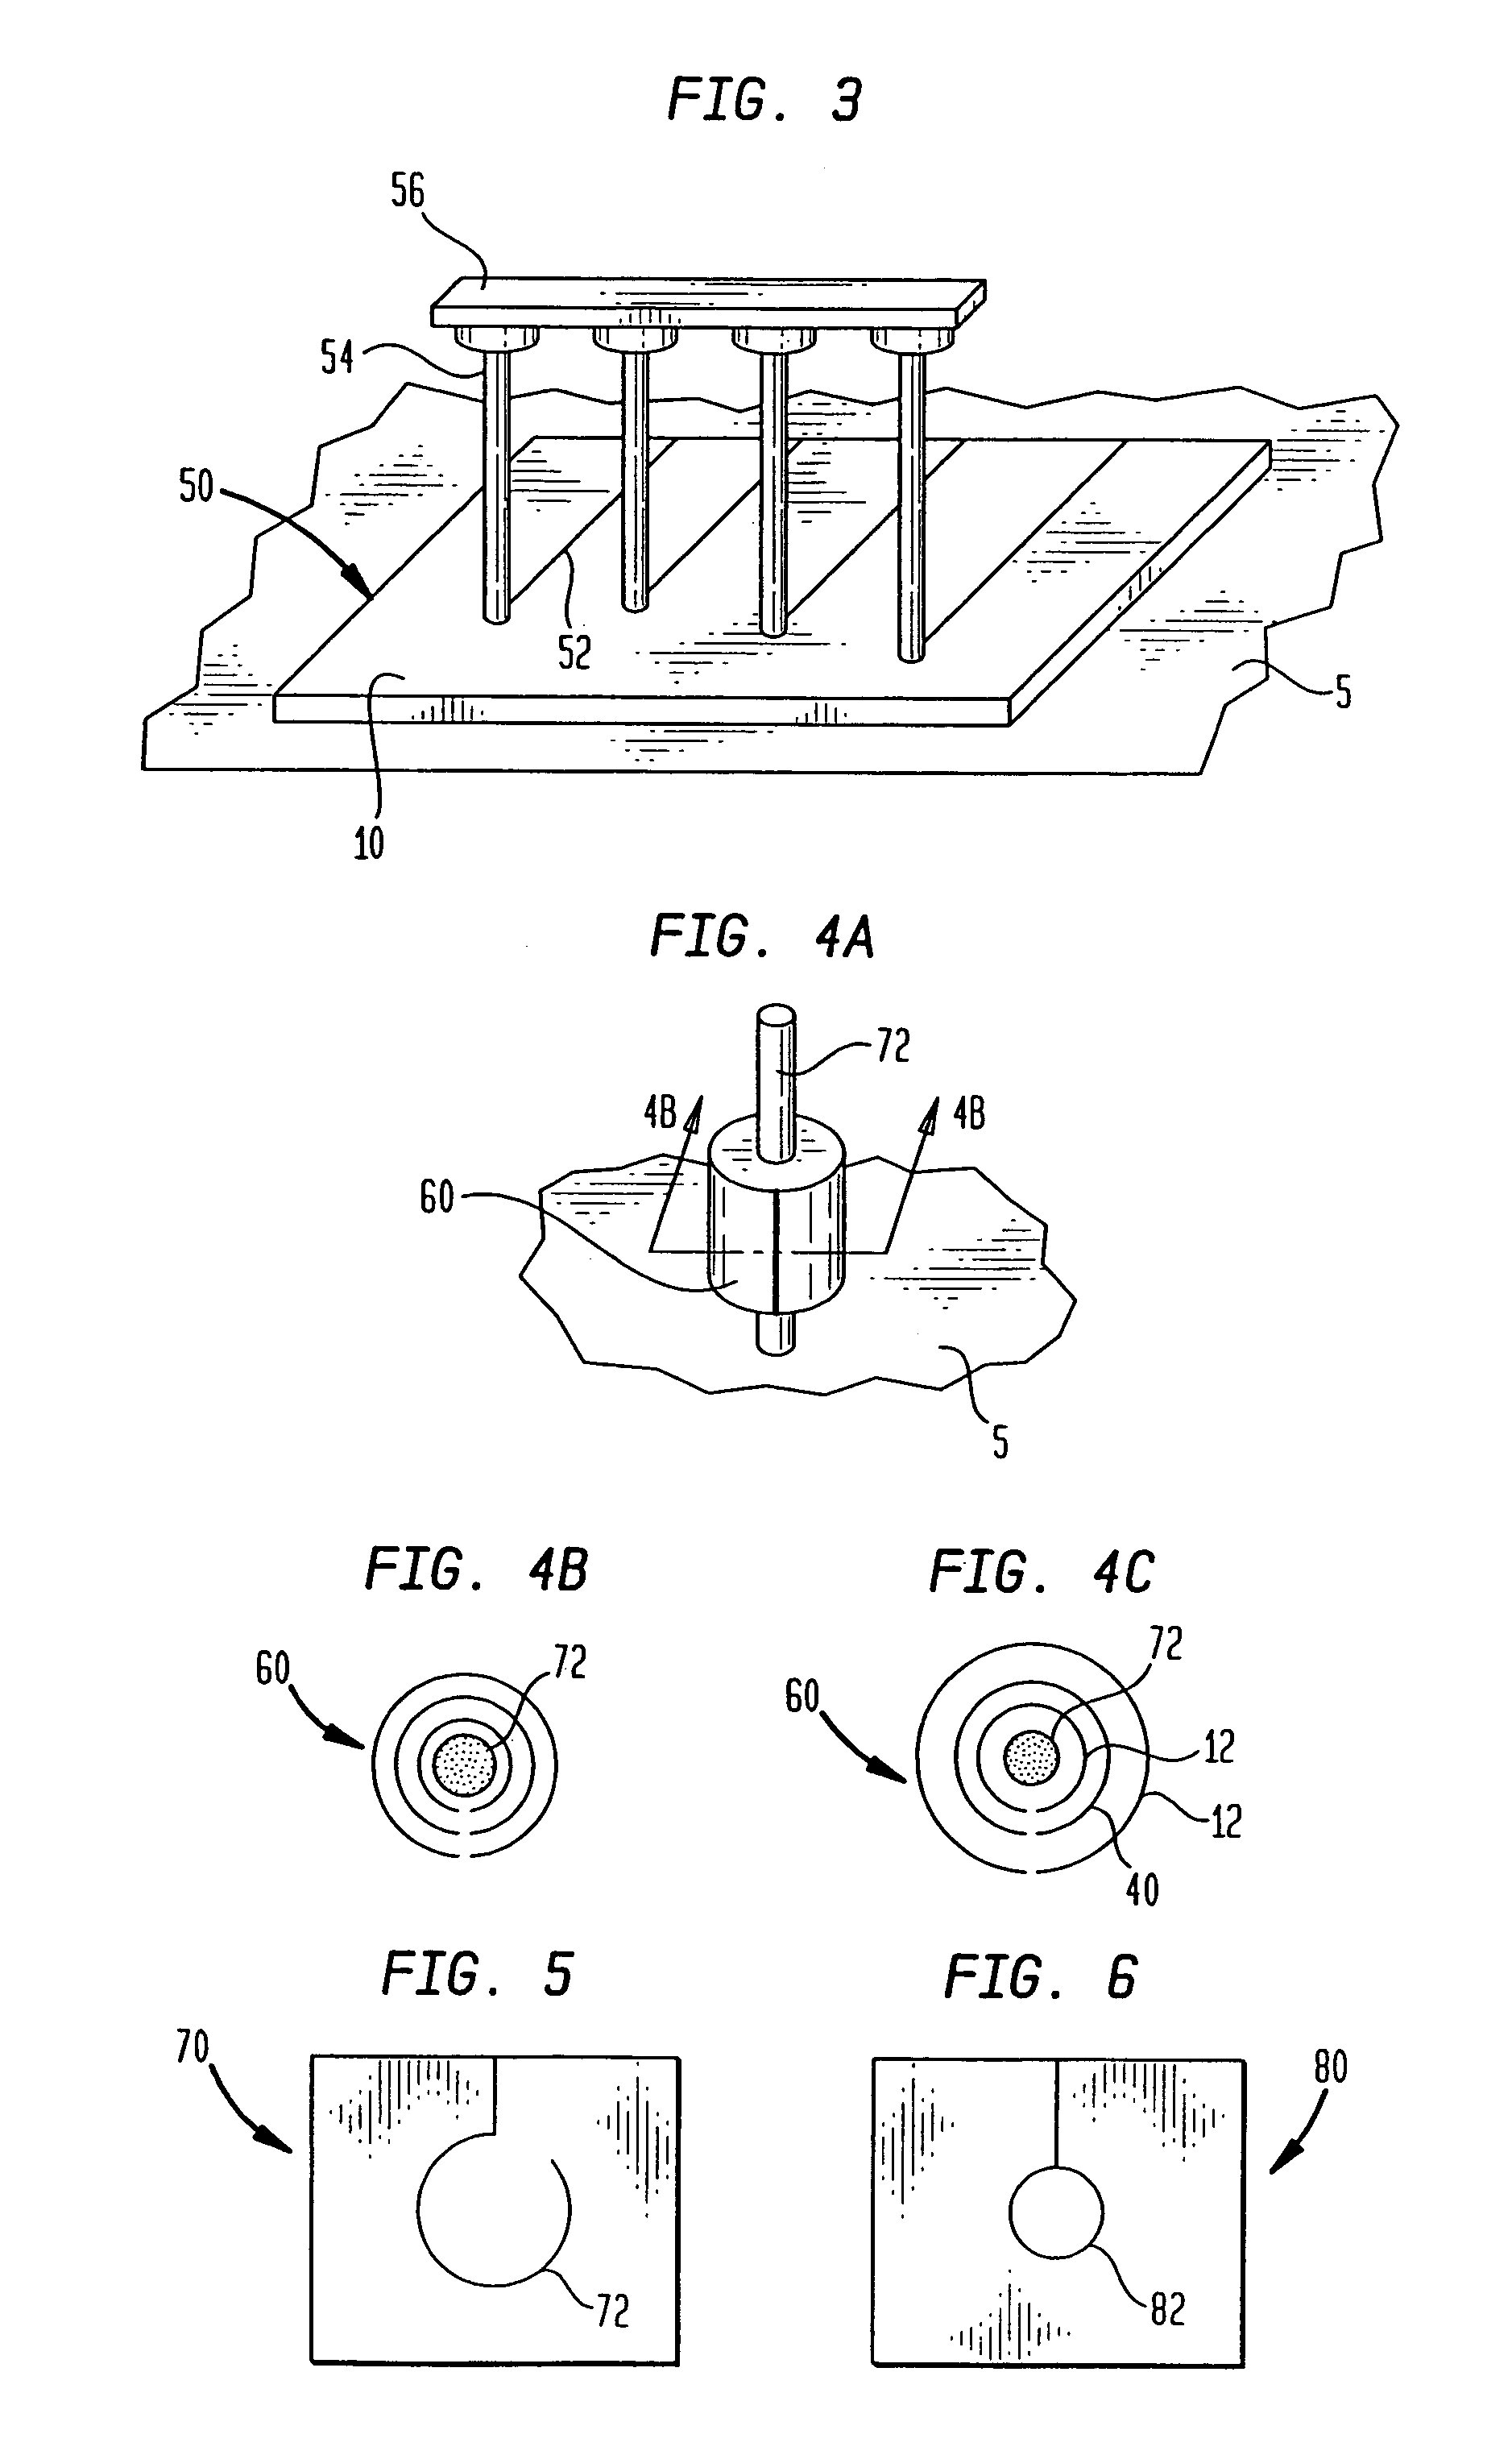 Multilayer conductive appliance having wound healing and analgesic properties